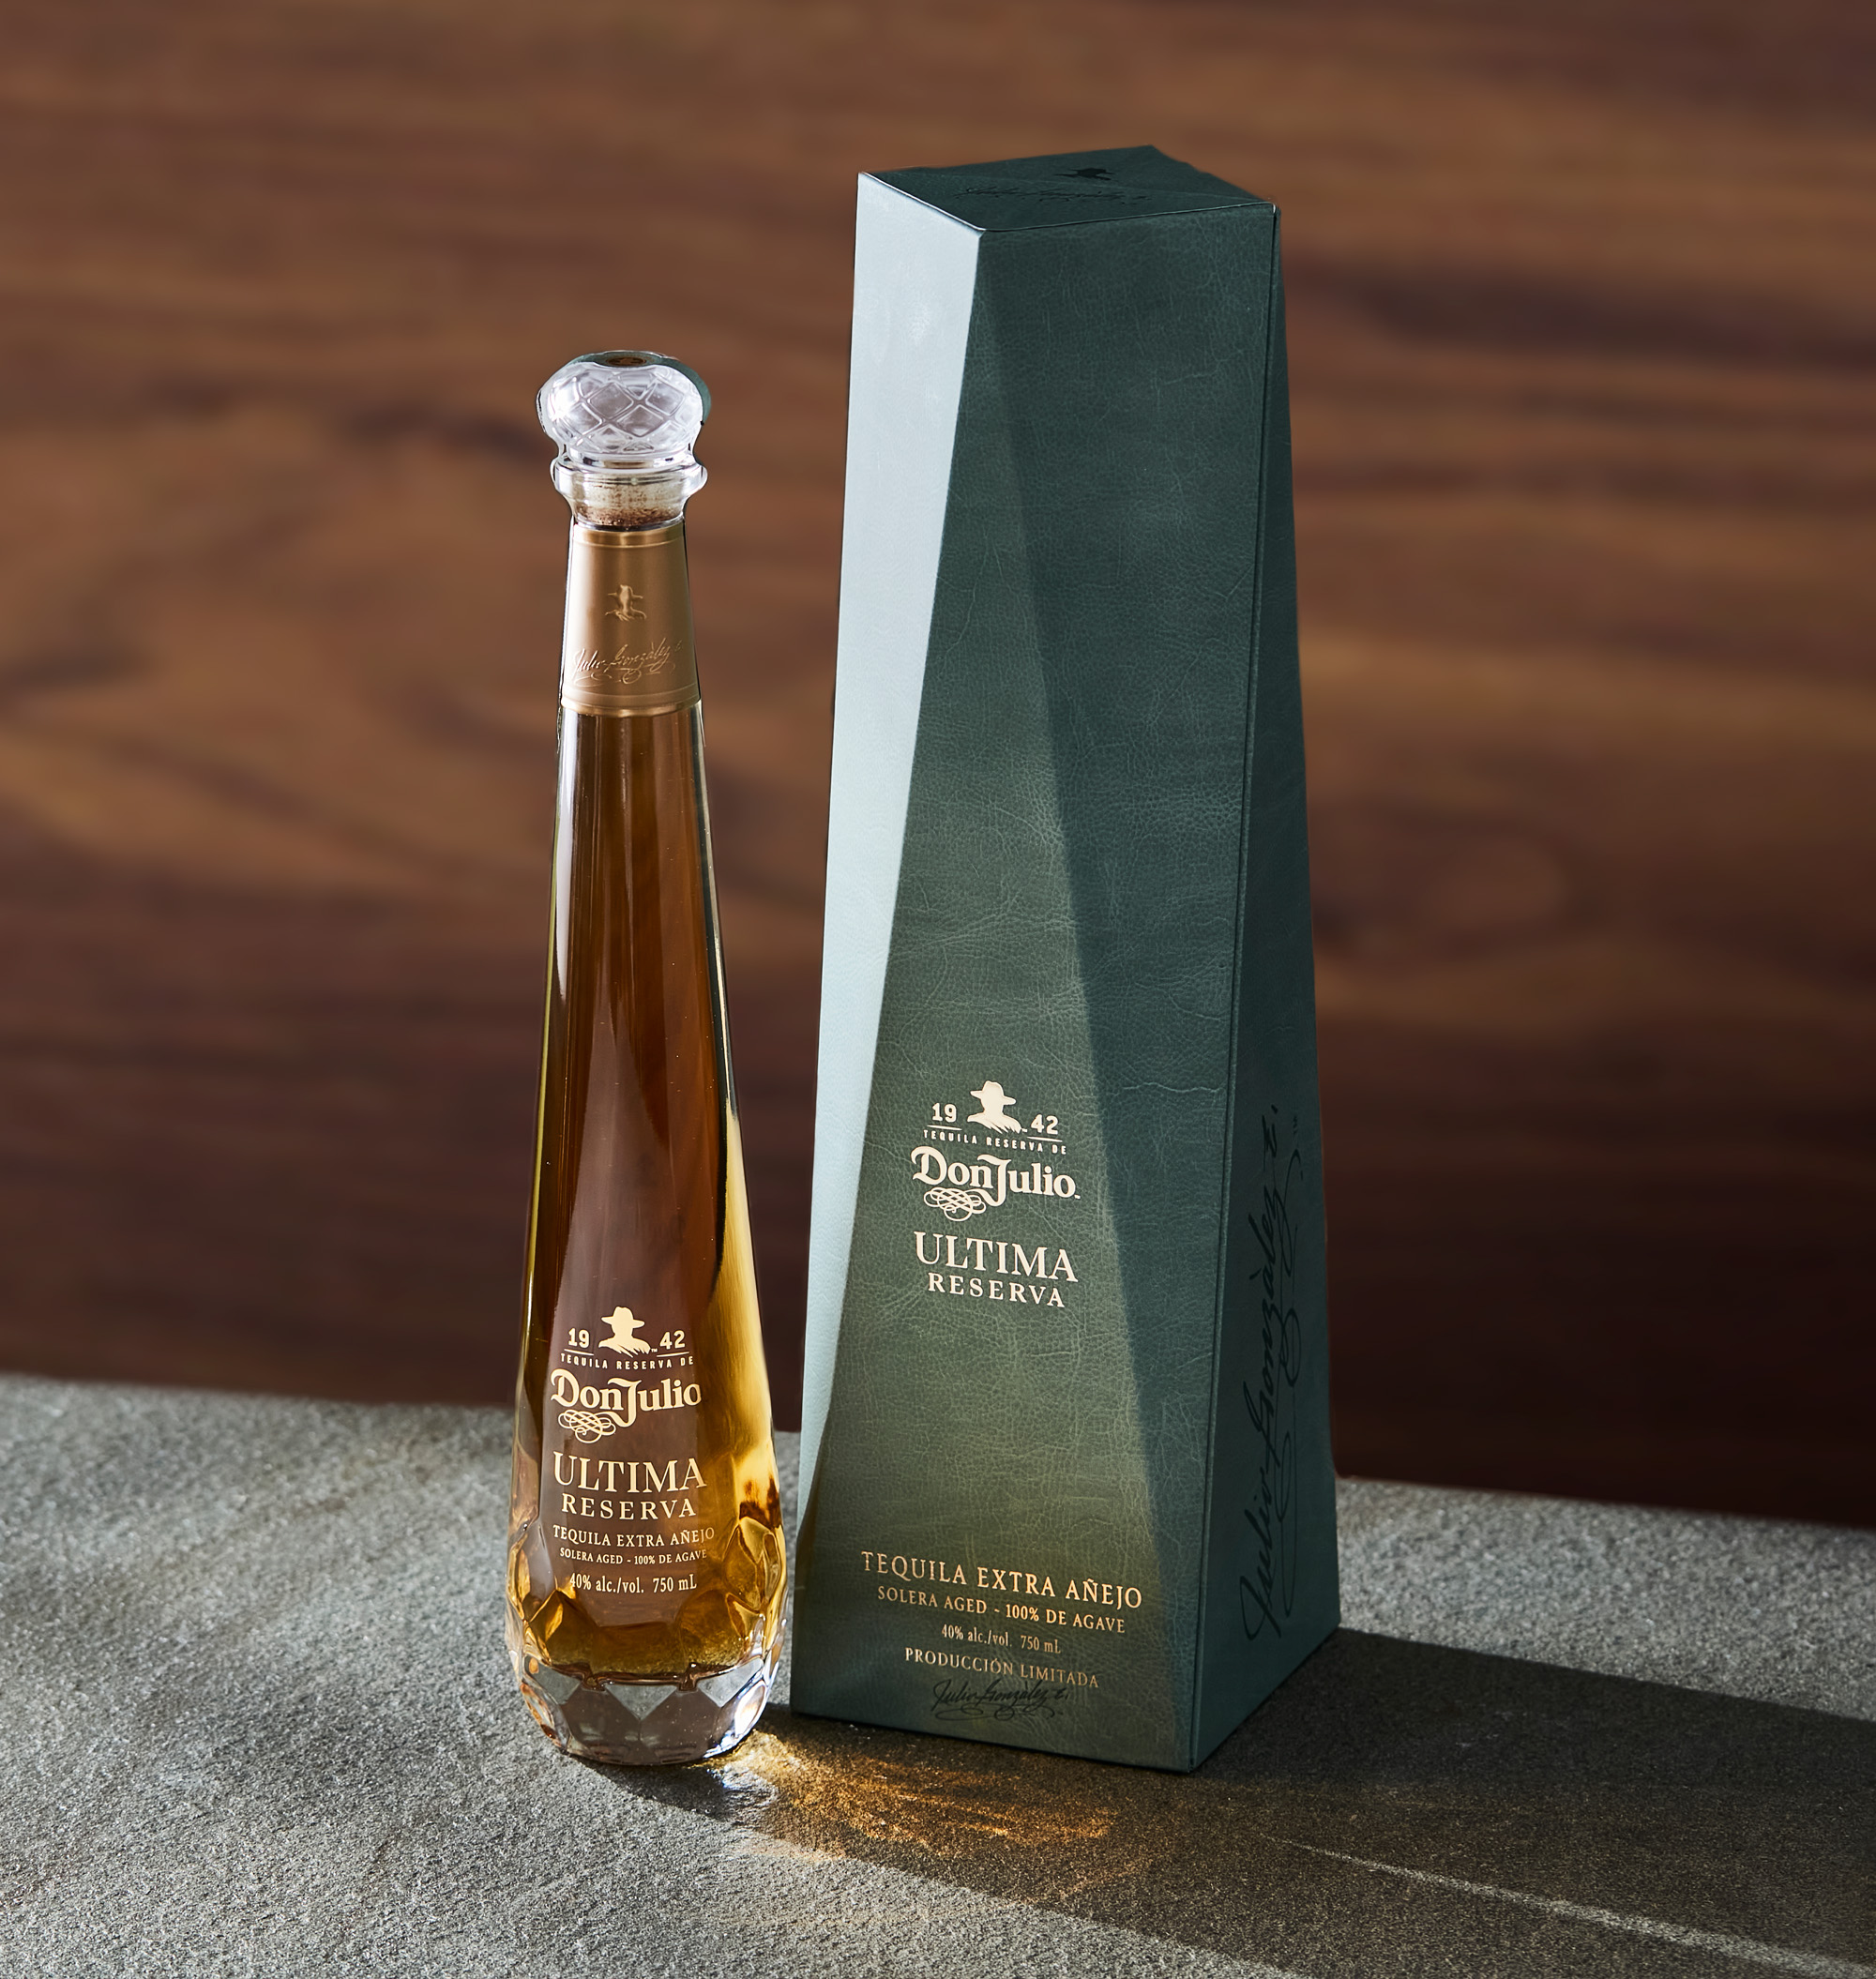 In celebration of the brand's upcoming 80th anniversary in 2022, Tequila Don Julio is proud to honor its late founder's life devoted to tequila making with the introduction of Tequila Don Julio Ultima Reserva.